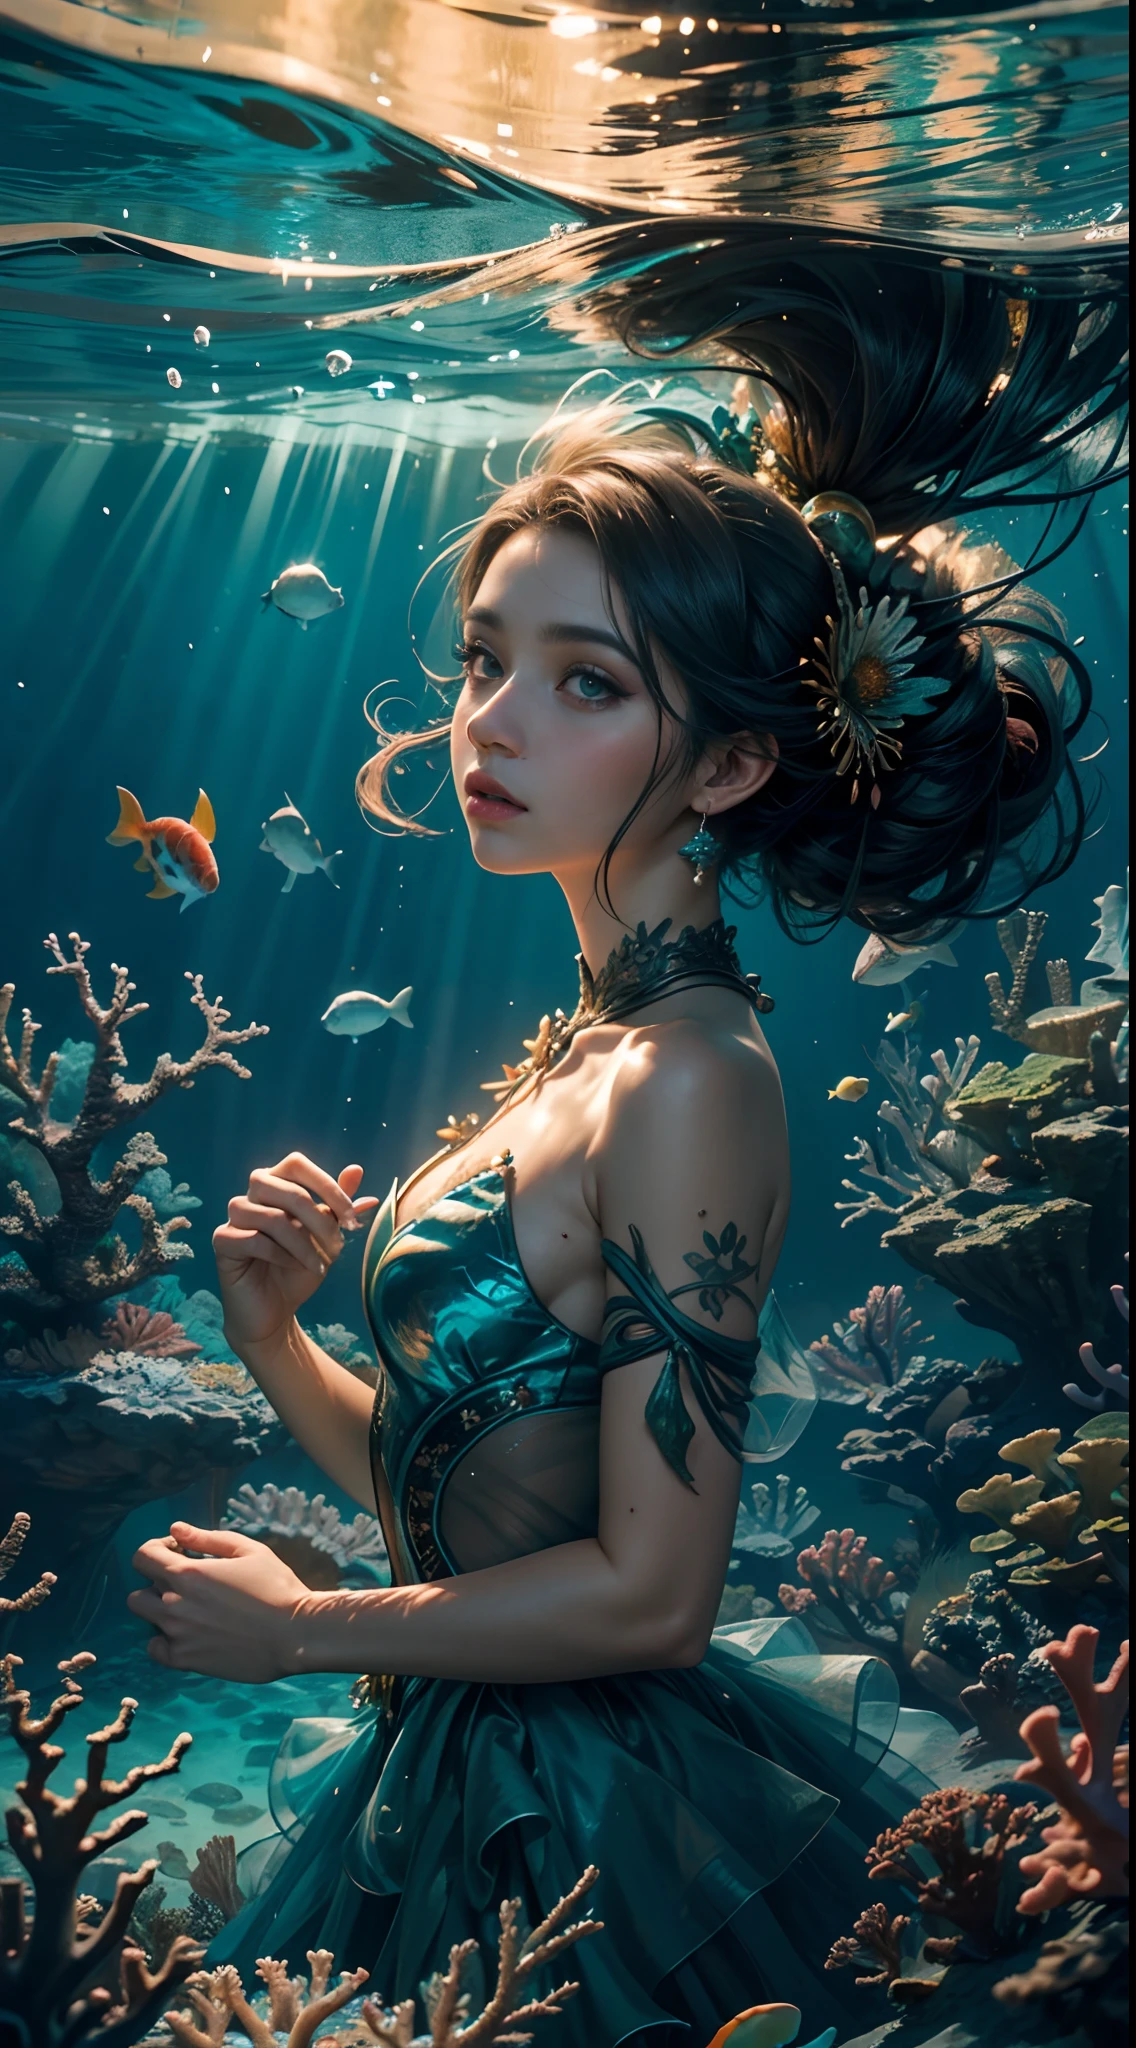 modelshoot style, (extremely detailed CG unit 8k wallpaper), A chaotic storm of intricate liquid smoke in the head, Stylized abstract portrait of pretty, skin wet,Koi，Koi bonito |，Bandas Koi,carp，Strangely shaped corals，Ocean floor，Beautiful coral reef in the background，rockery,Marine life，author：Petros Afshar, ross tran, Tom Baleia, peter mohrbacher, art germ, vidro quebrado, ((bubbly underwater scenery)) The octane rendering of radiant light is highly detailed